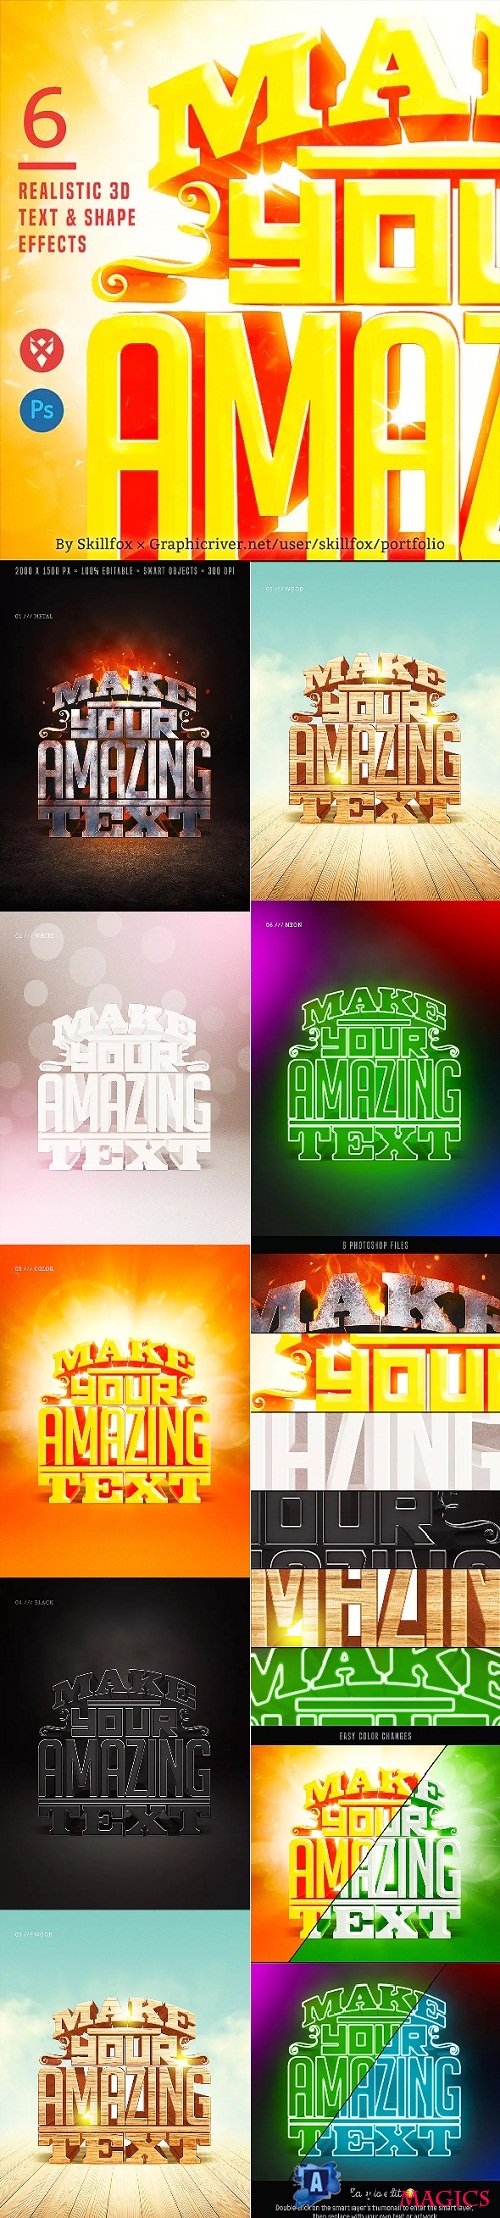 6 Realistic 3D Text Effects - 23306691